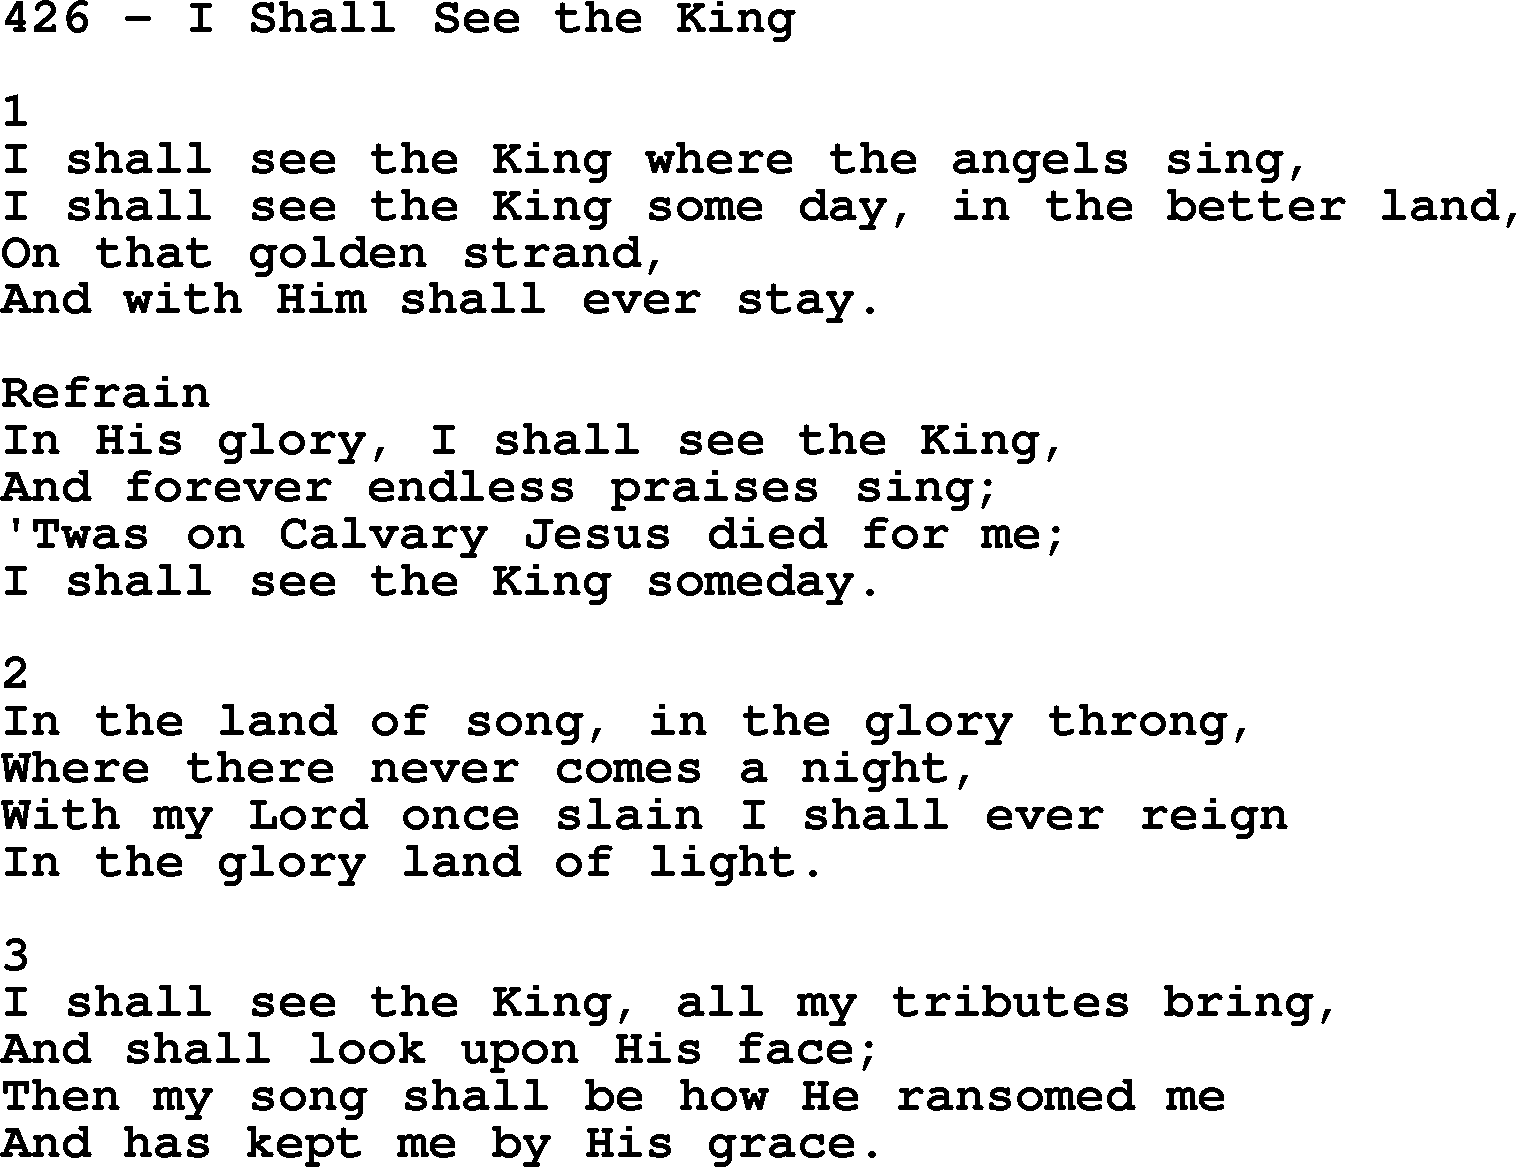 Complete Adventis Hymnal, title: 426-I Shall See The King, with lyrics, midi, mp3, powerpoints(PPT) and PDF,